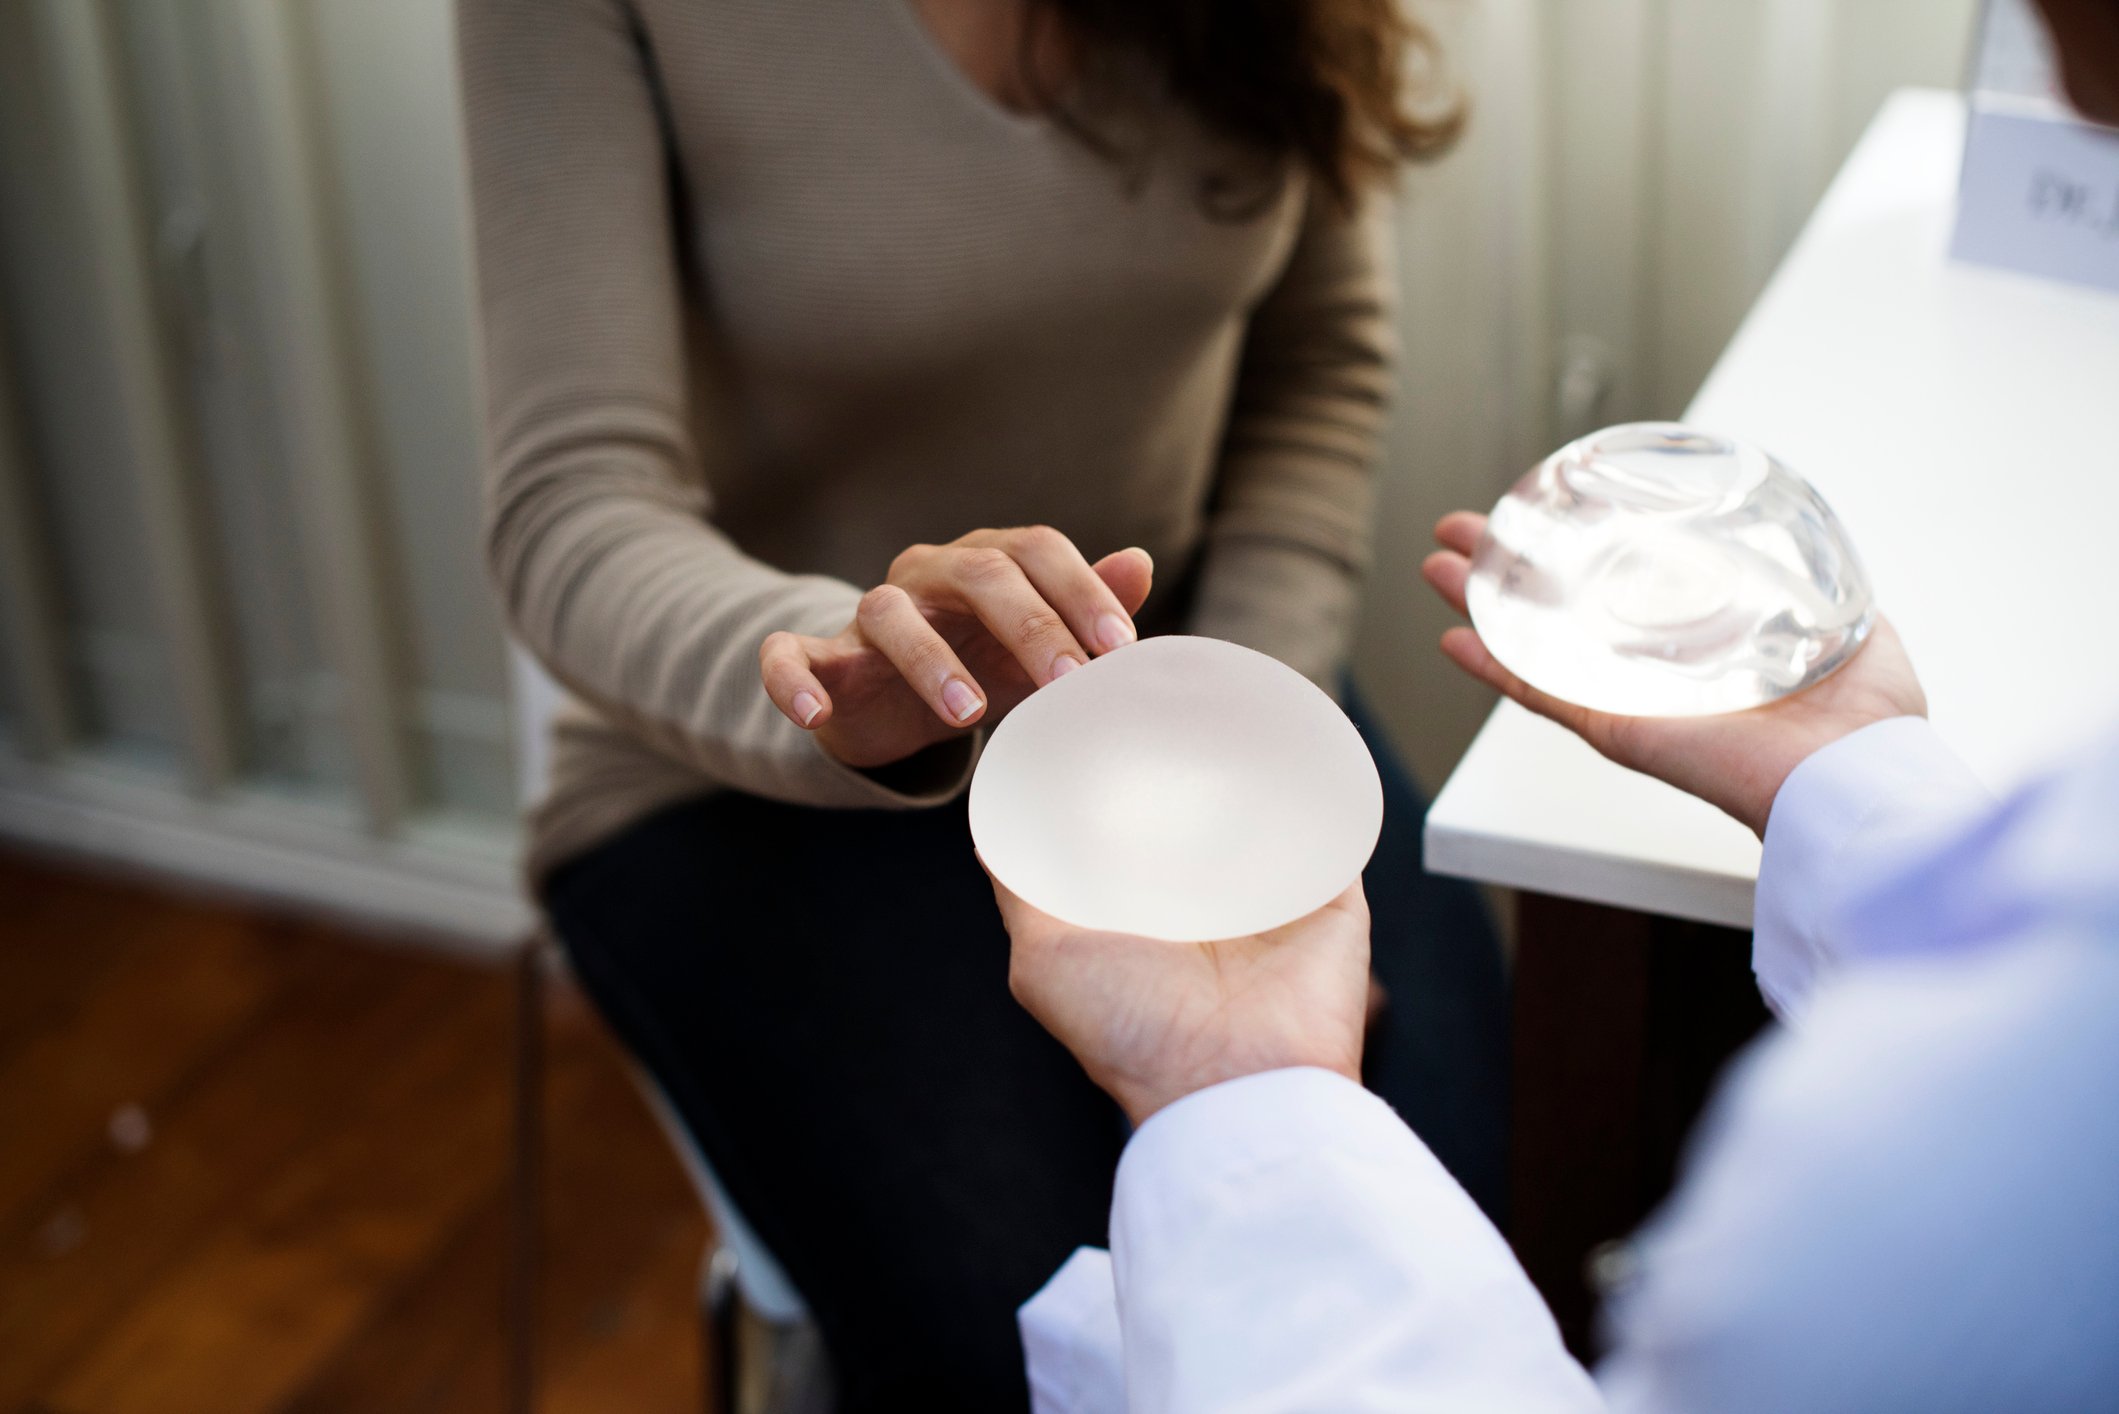 FDA Issues New Labelling, Consent Requirements for Breast Implants